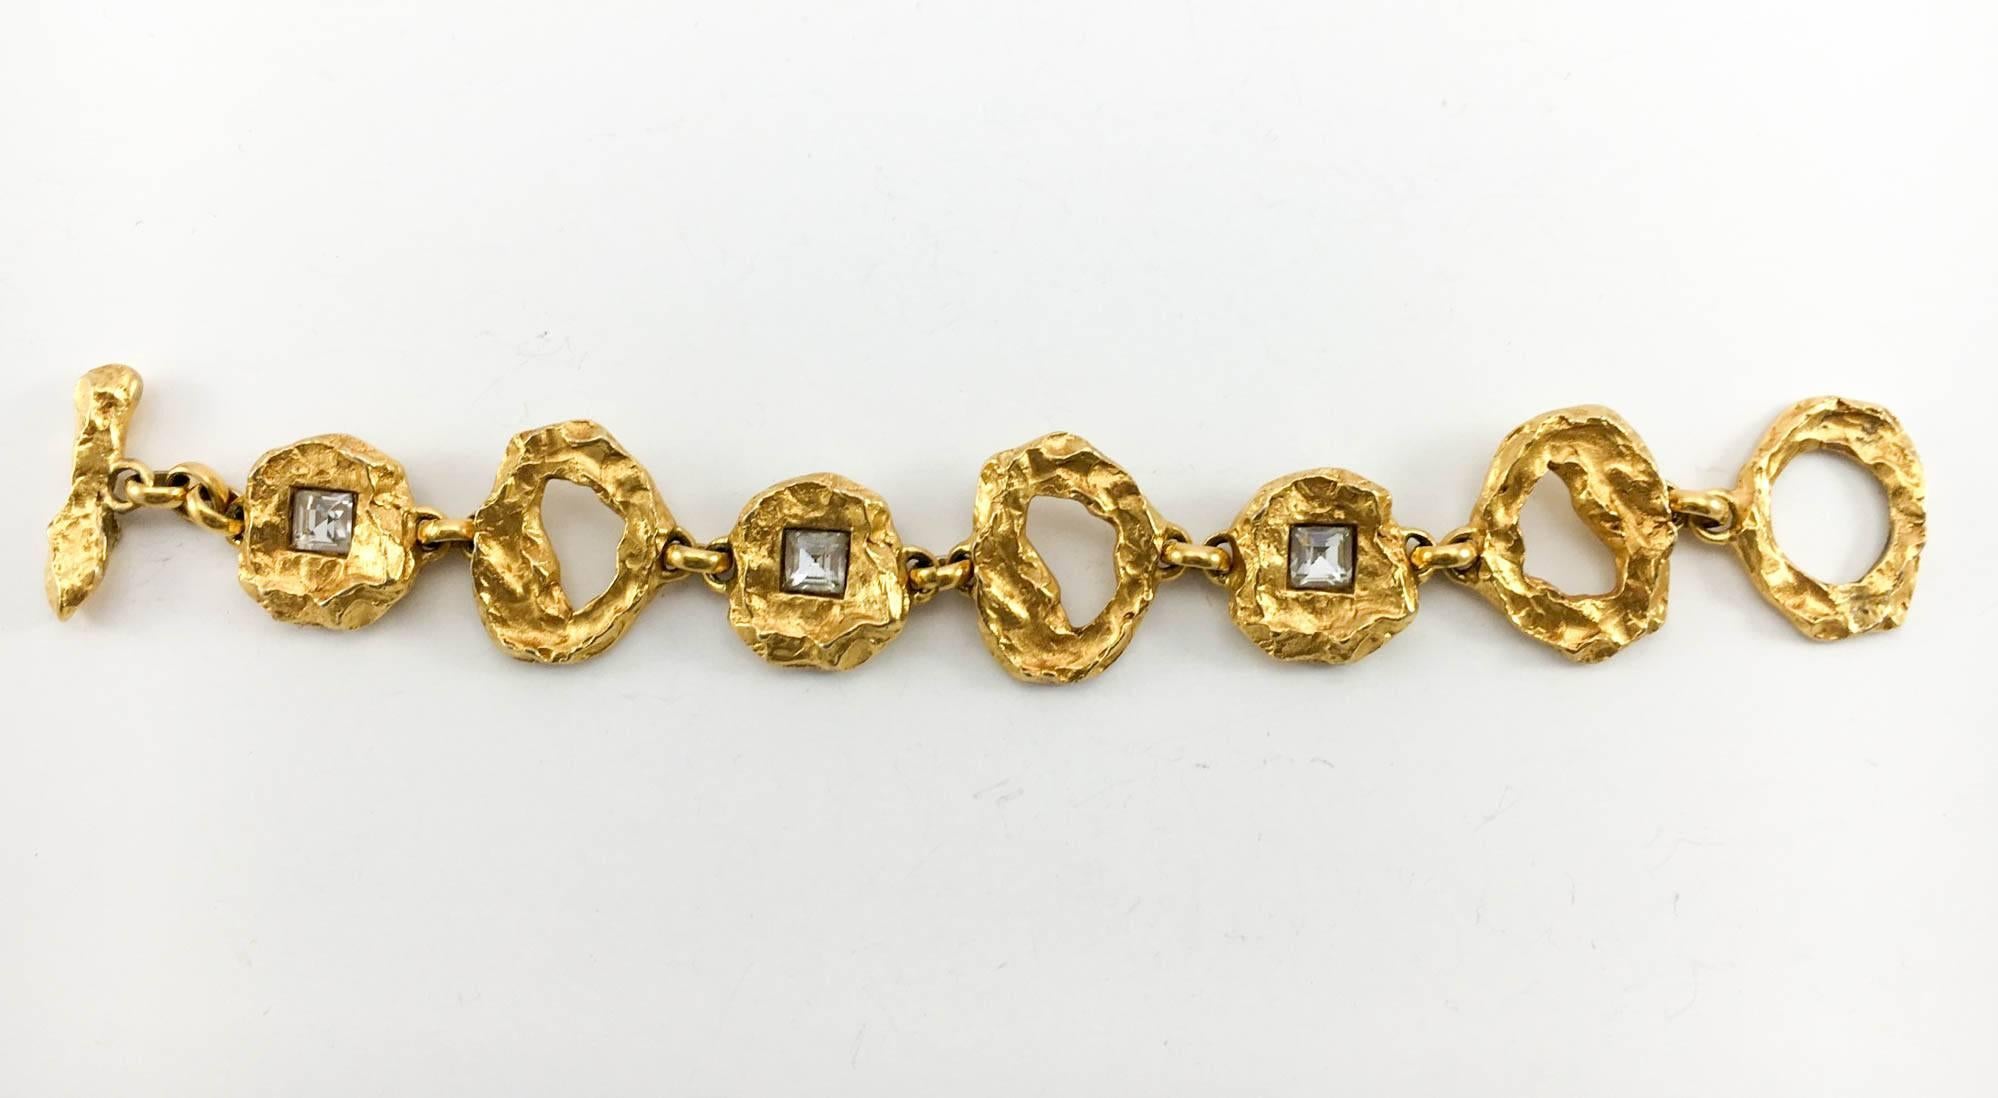 Women's Lacroix Gold-Plated and Rhinestone Bracelet, by Goossens - 1980s